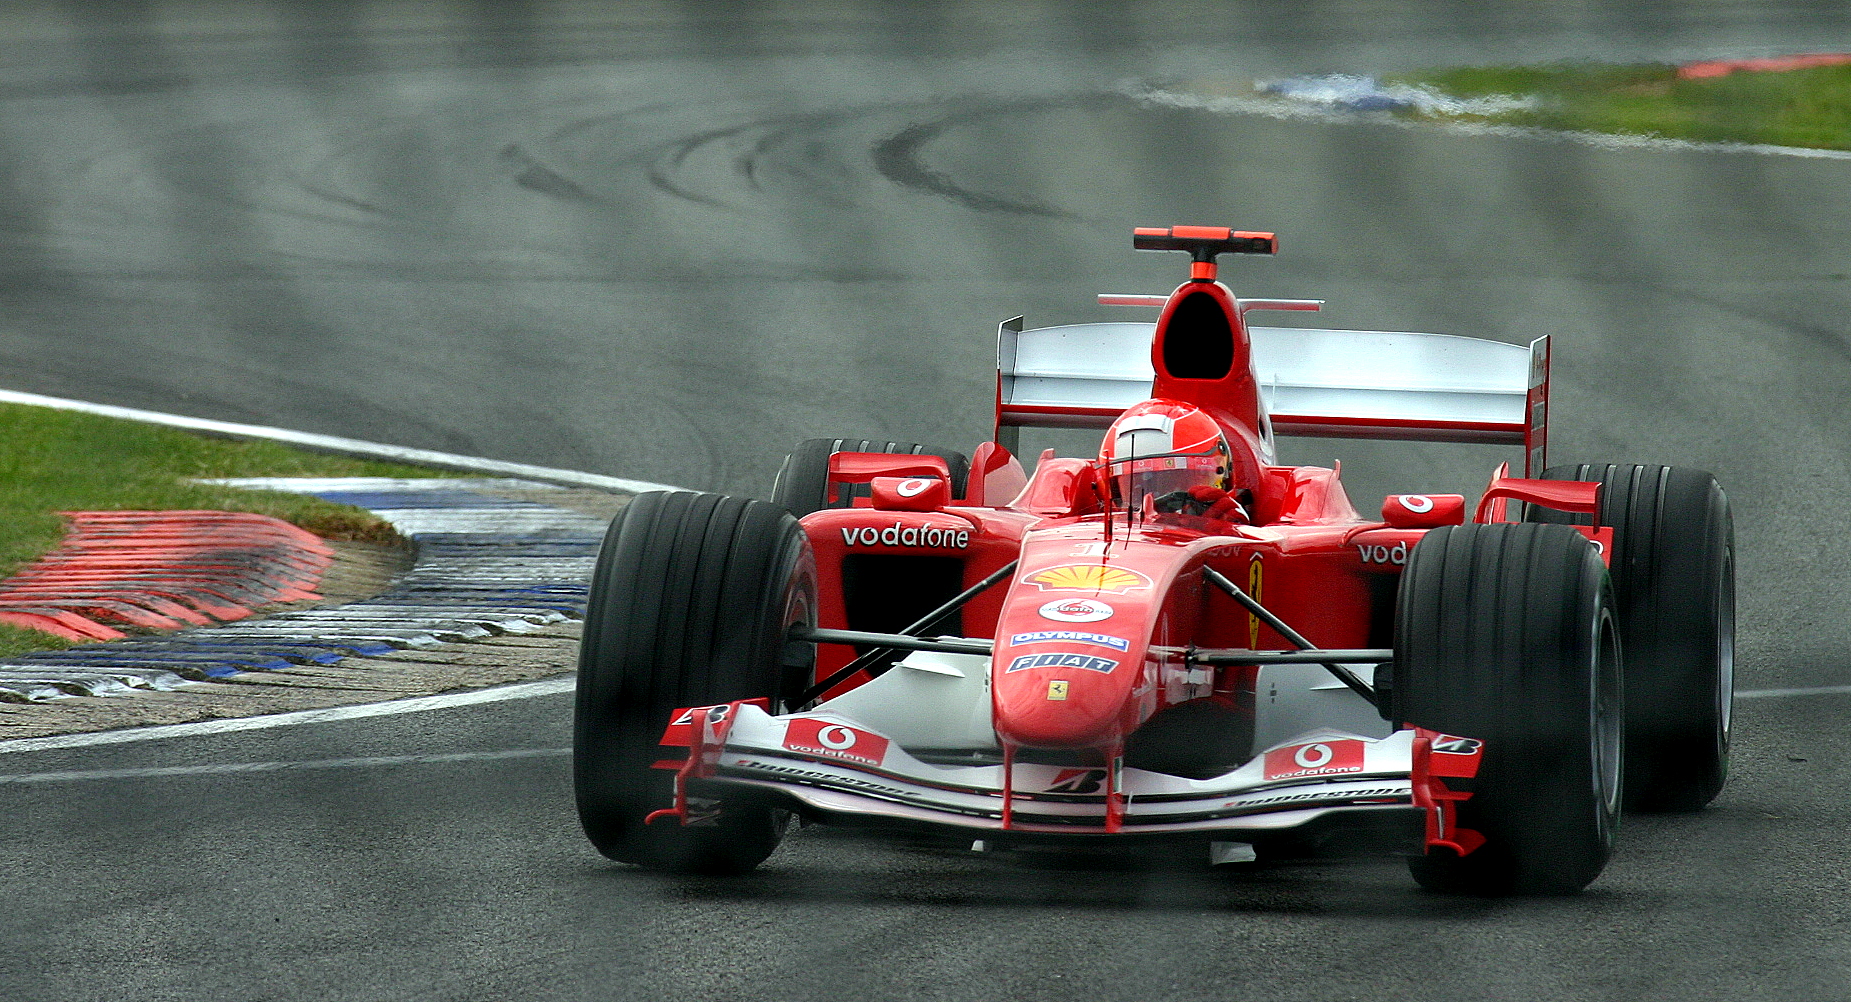 Michael Schumacher F2004 during practice for the 2004 British Grand